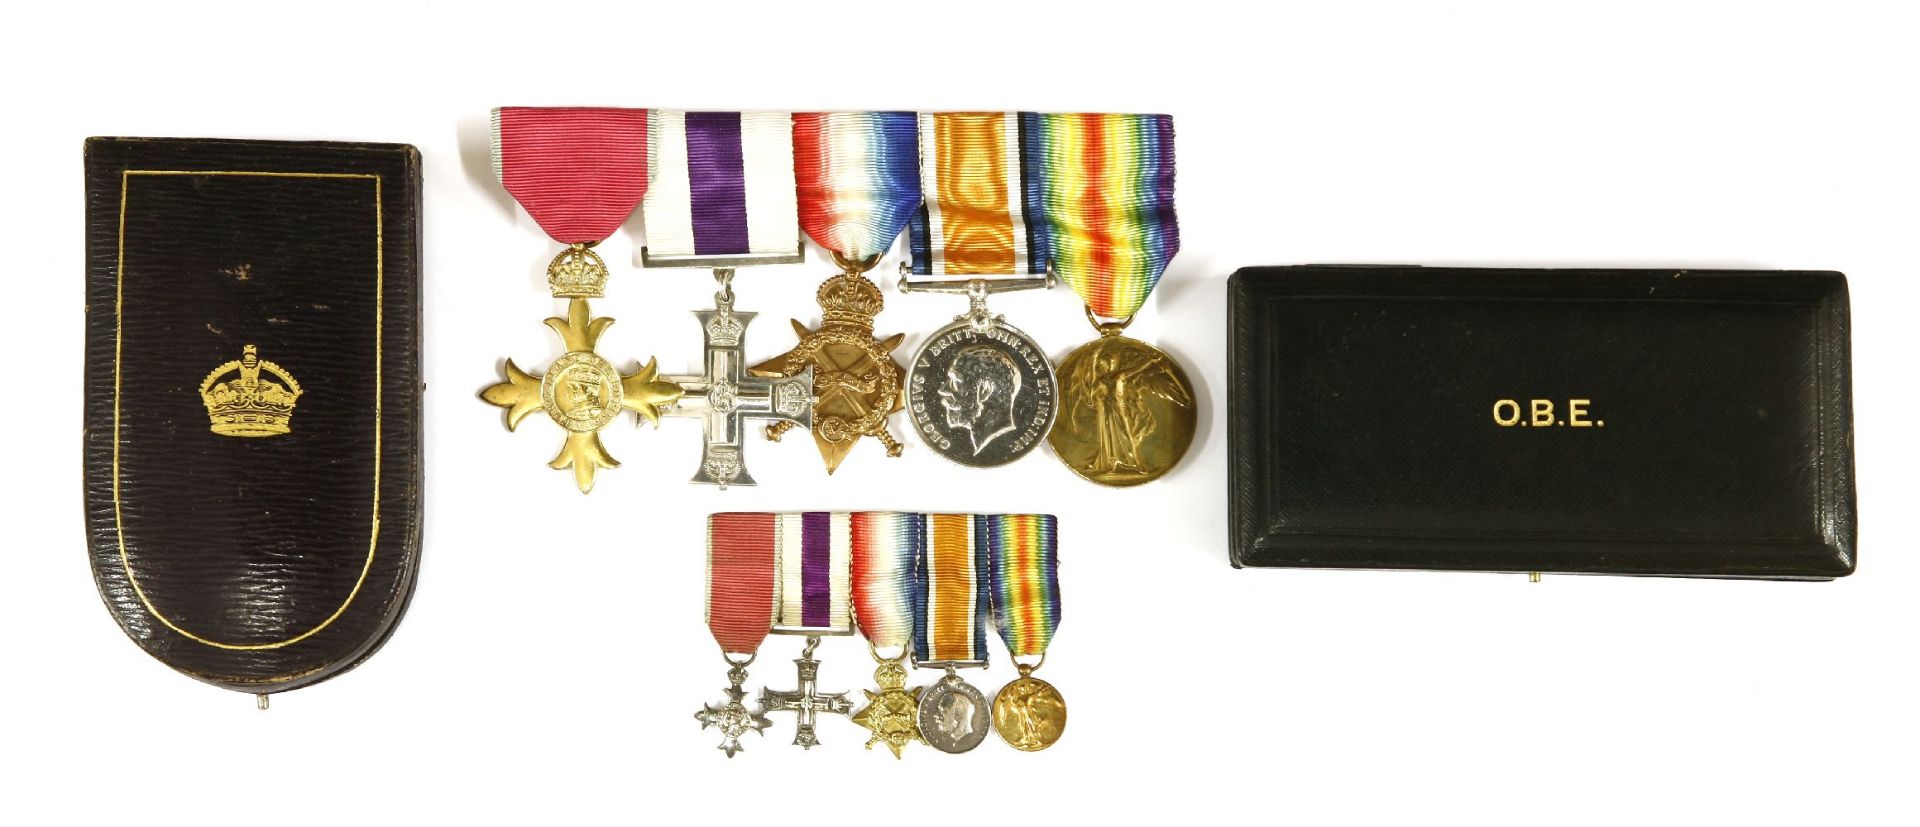 A military cross group of five medals,to Capt. Thomas Ralph Sneyd-Kynnersley, Royal Engineers,